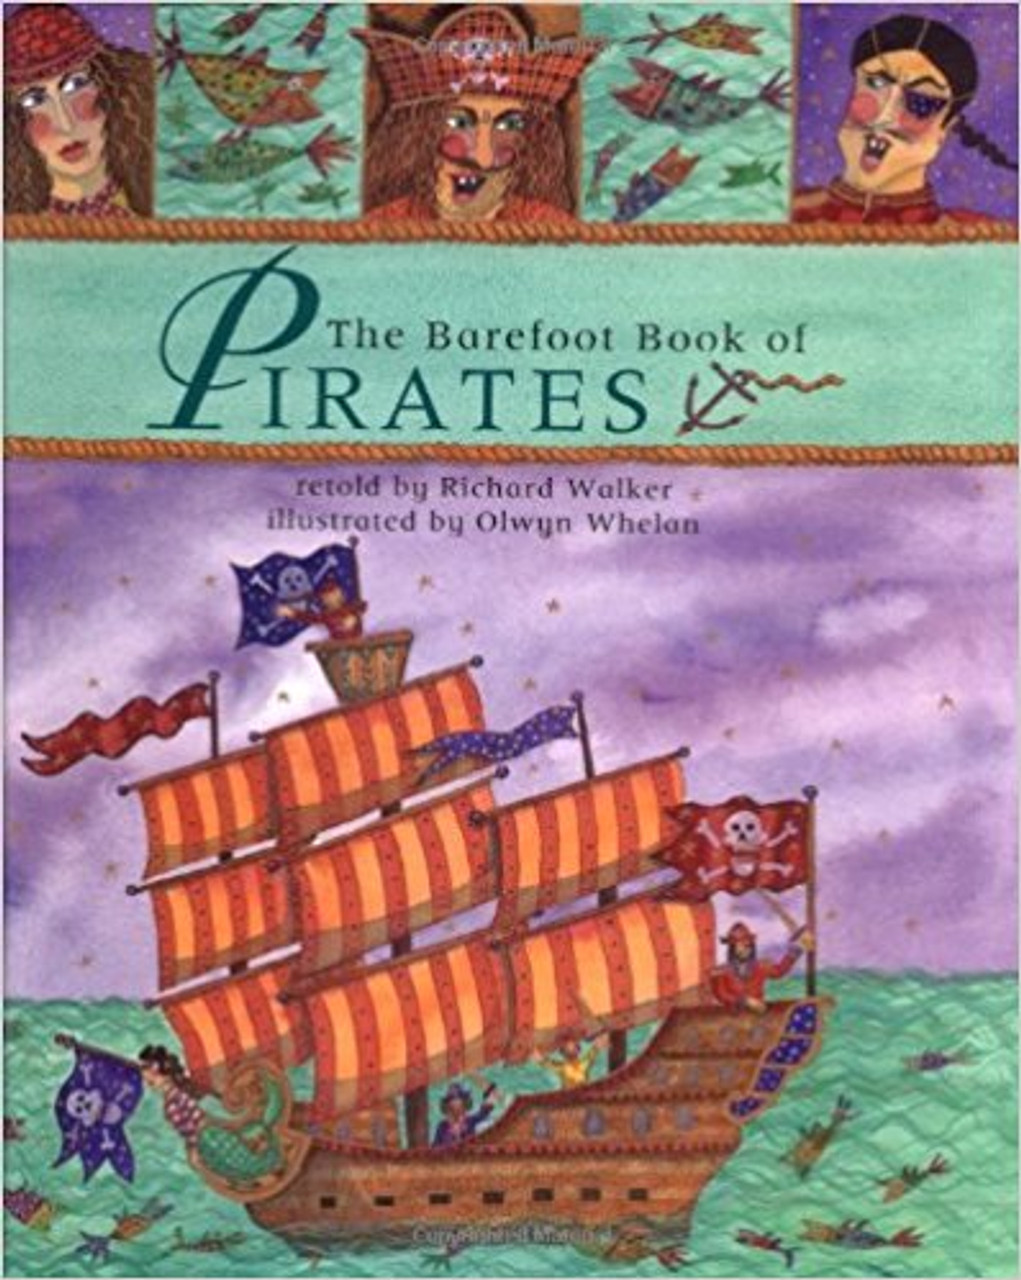 The Barefoot Book of Pirates by Richard Walker